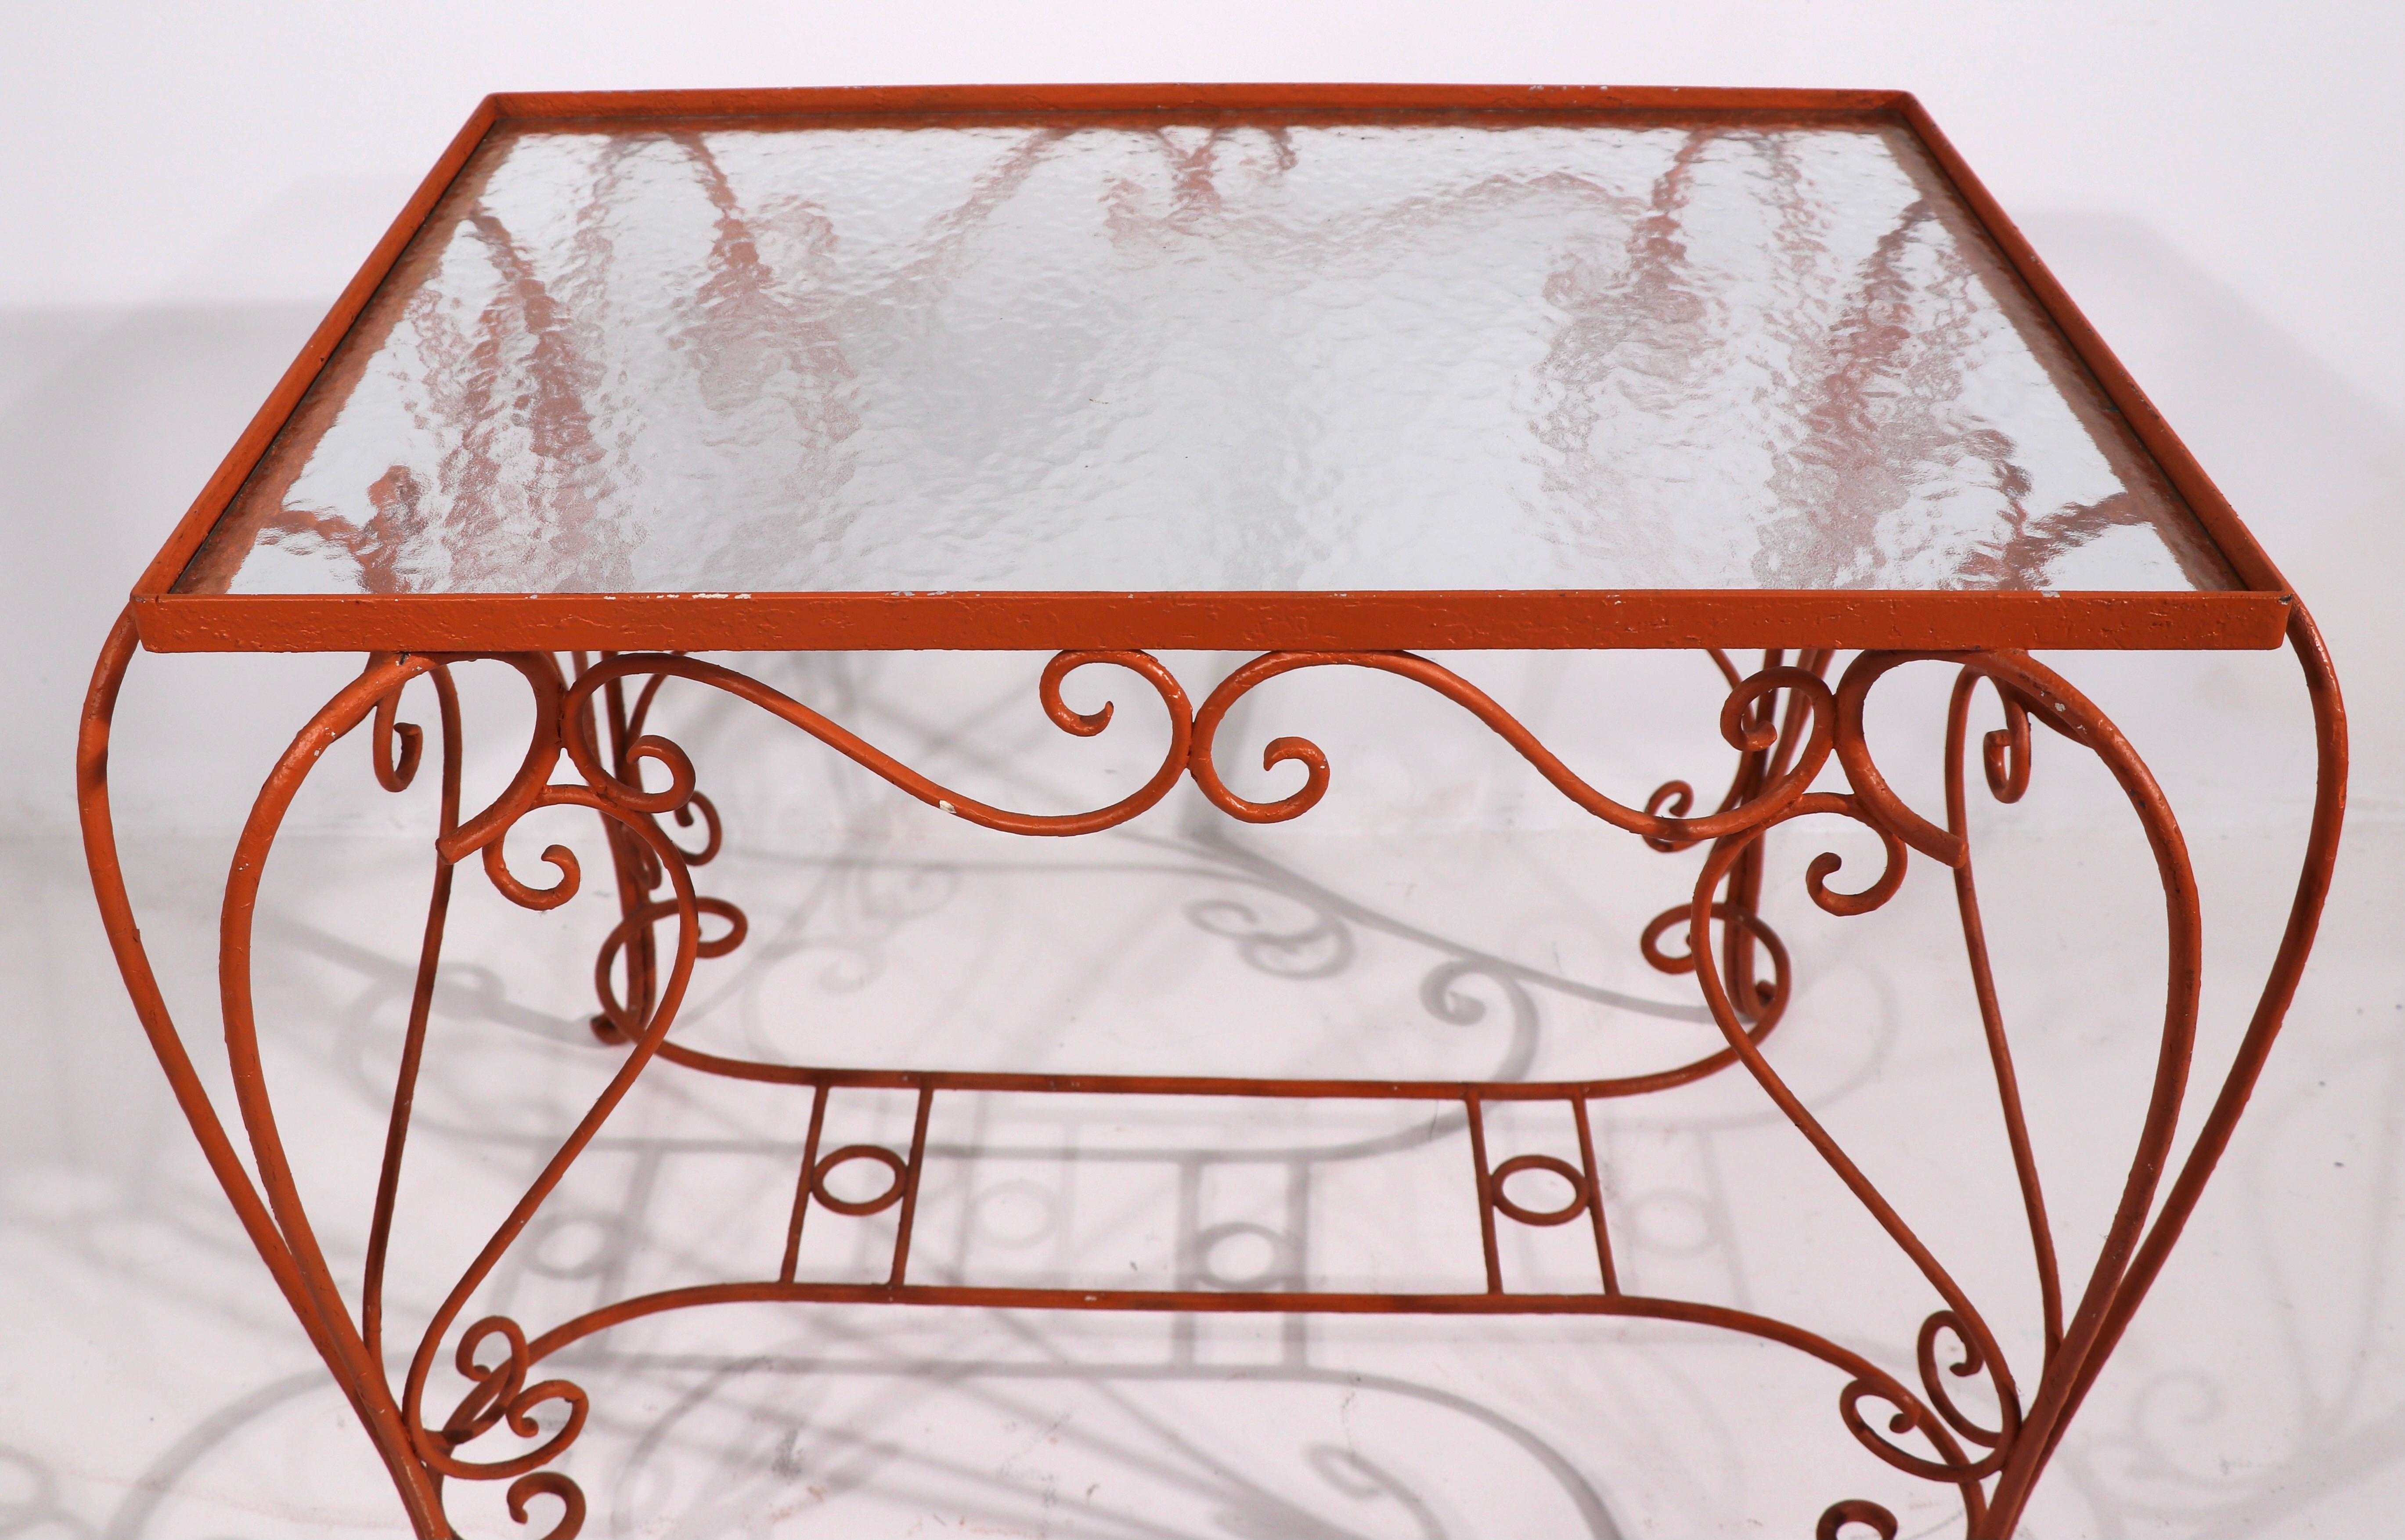 Ornate Wrought Iron Garden Patio Poolside Table with Textured Glass top 1